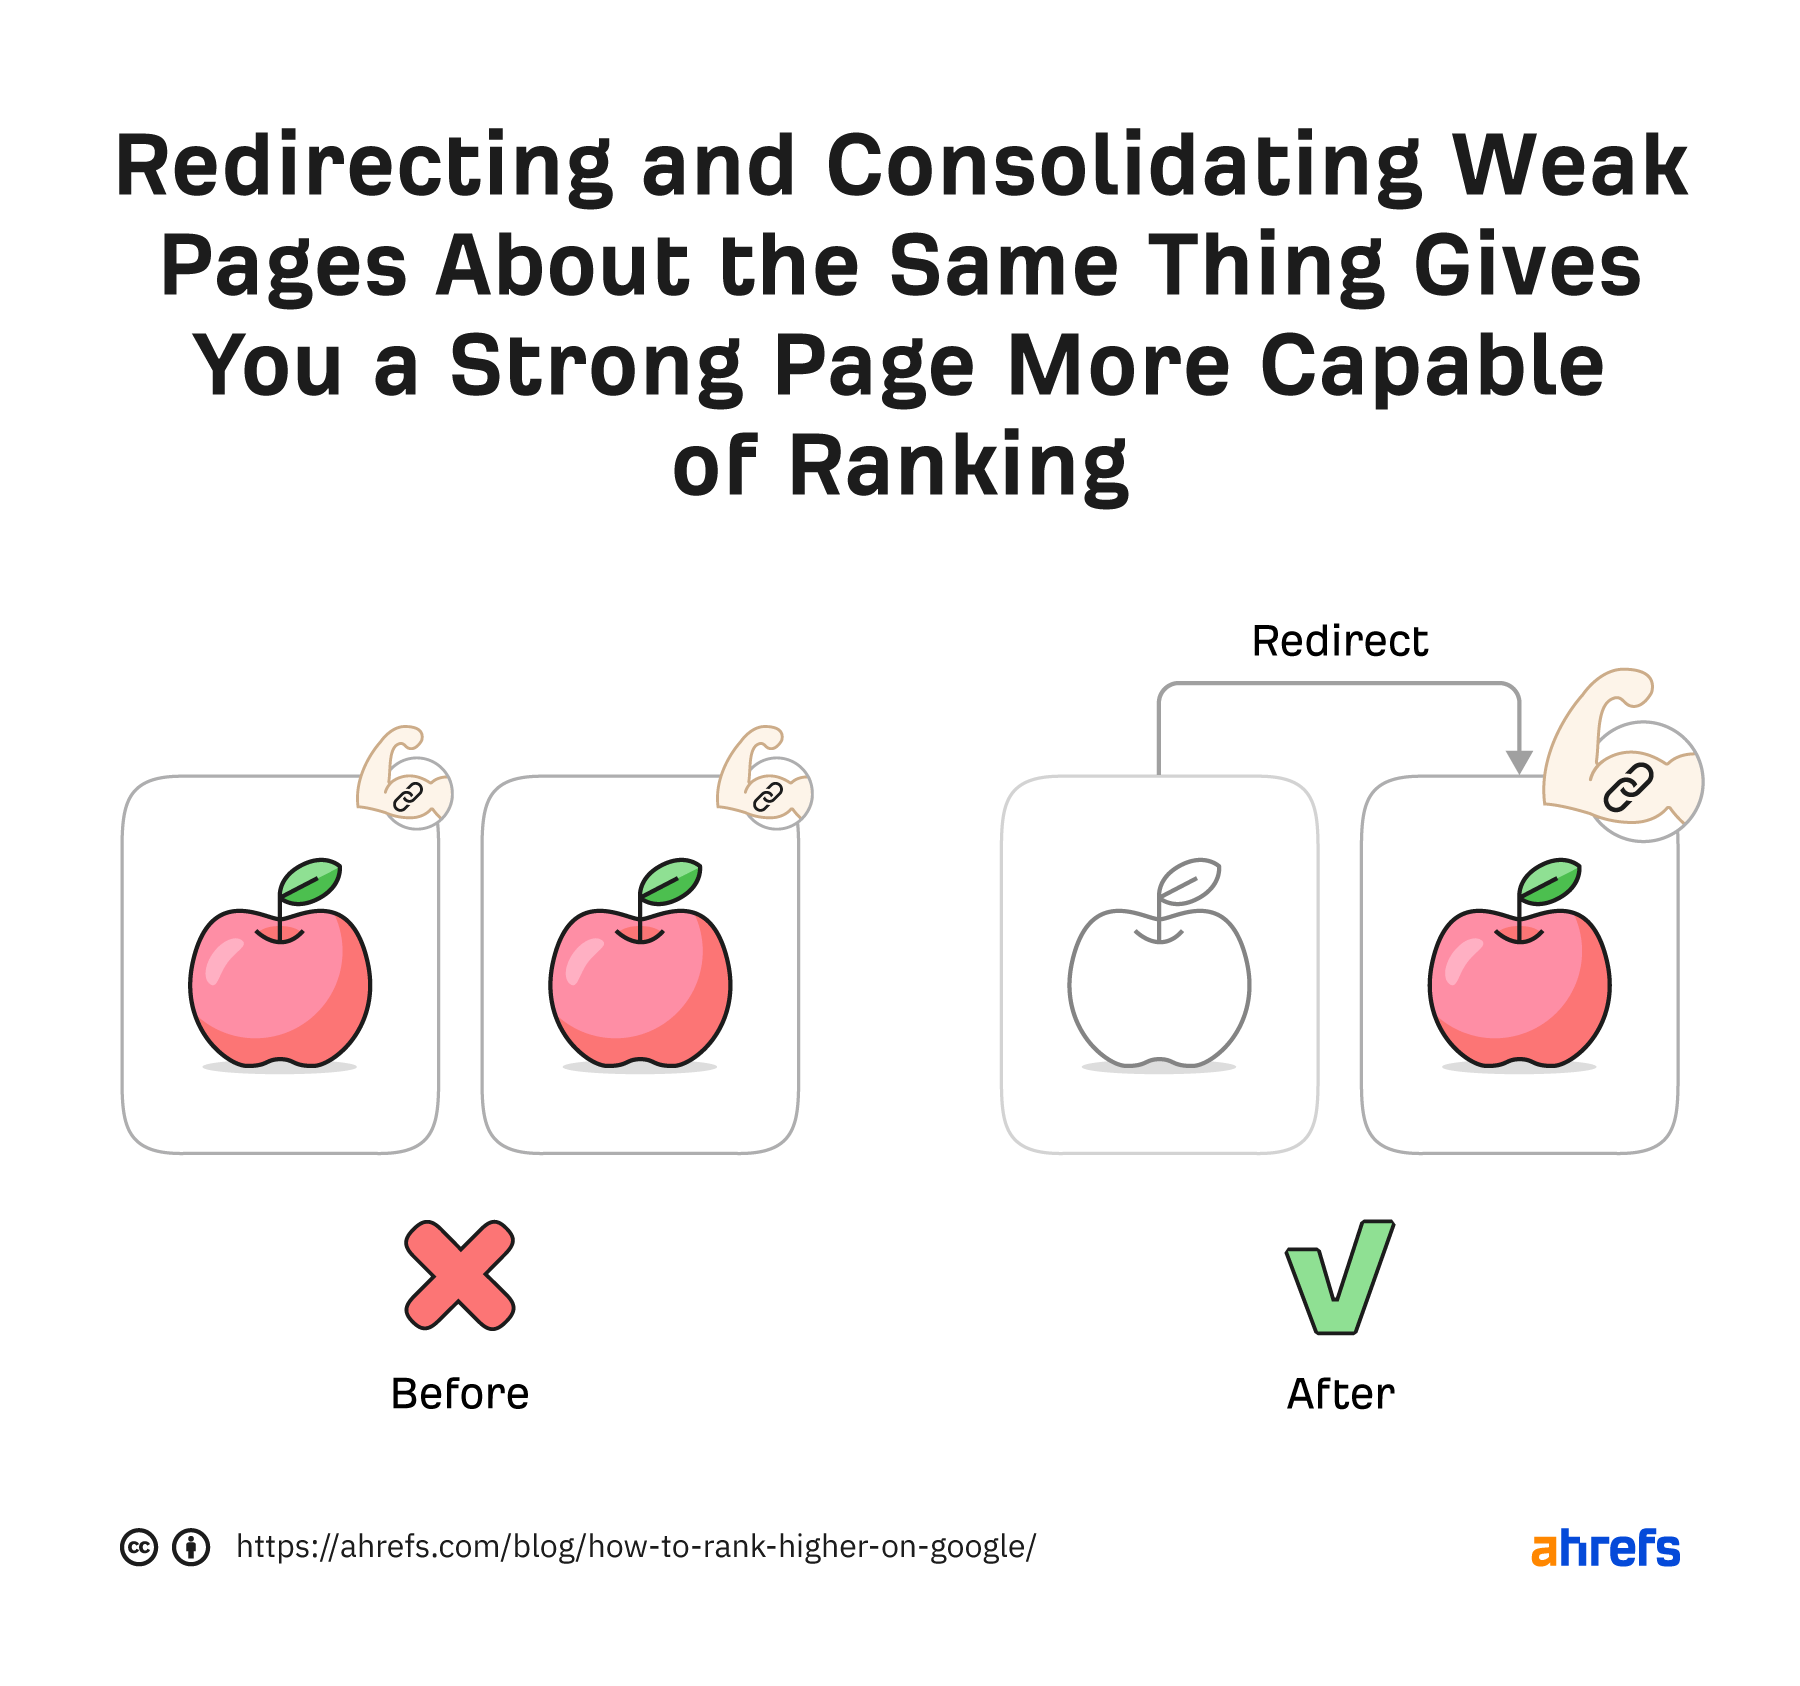 Redirecting and consolidating pages about the same thing gives you a strong page more capable of ranking
